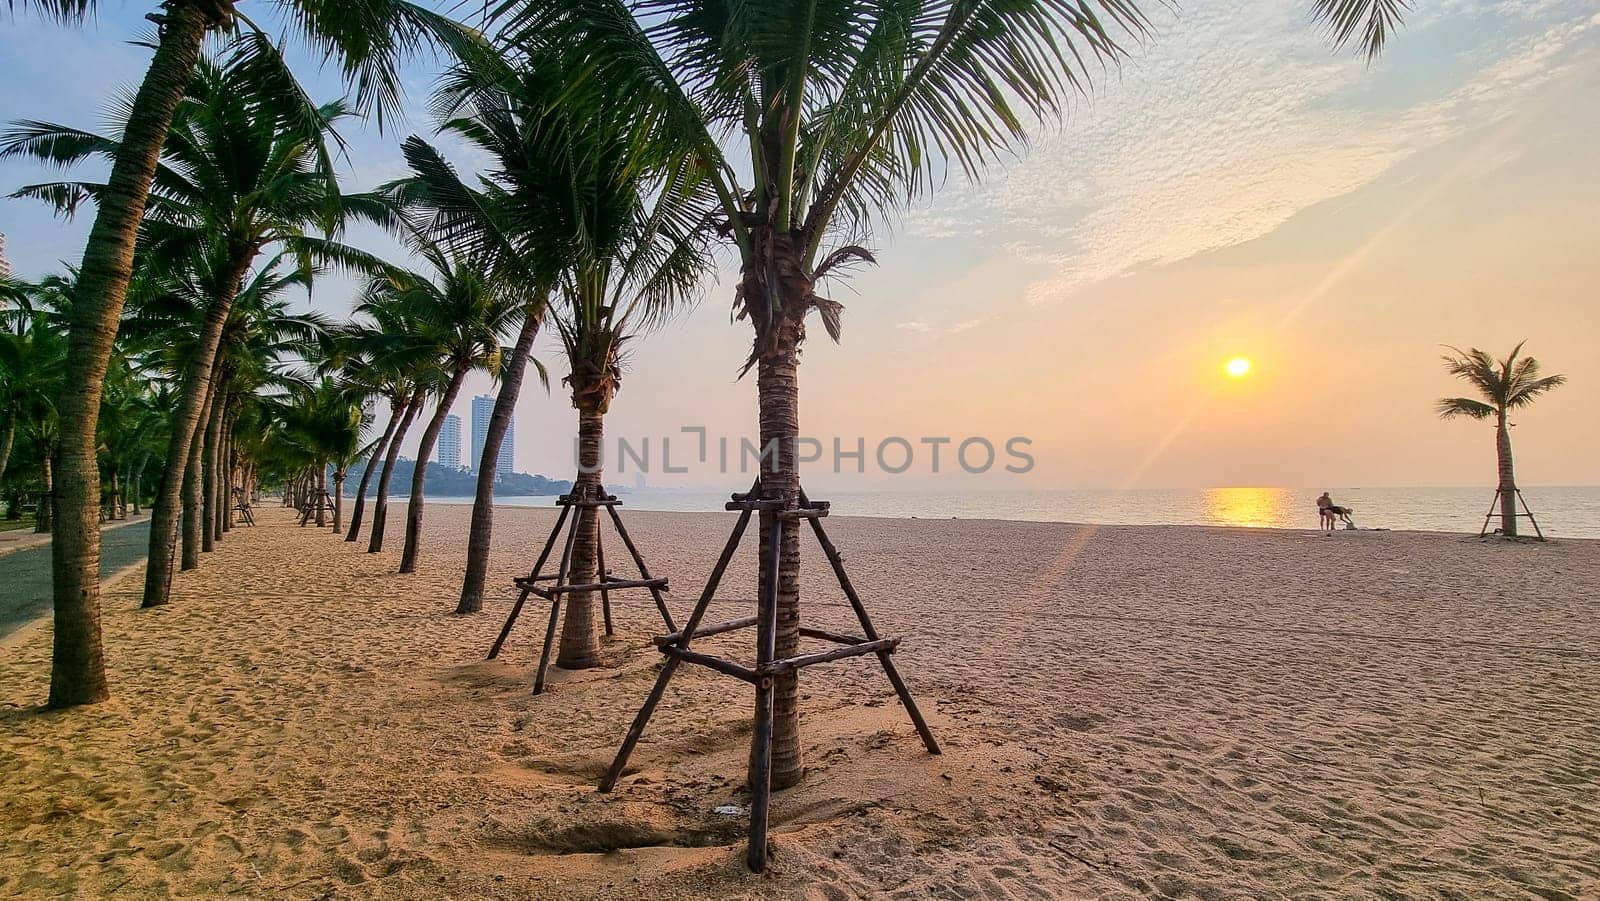 A serene beach scene with tall palm trees swaying in the breeze against a colorful sunset backdrop. . Pattaya Thailand